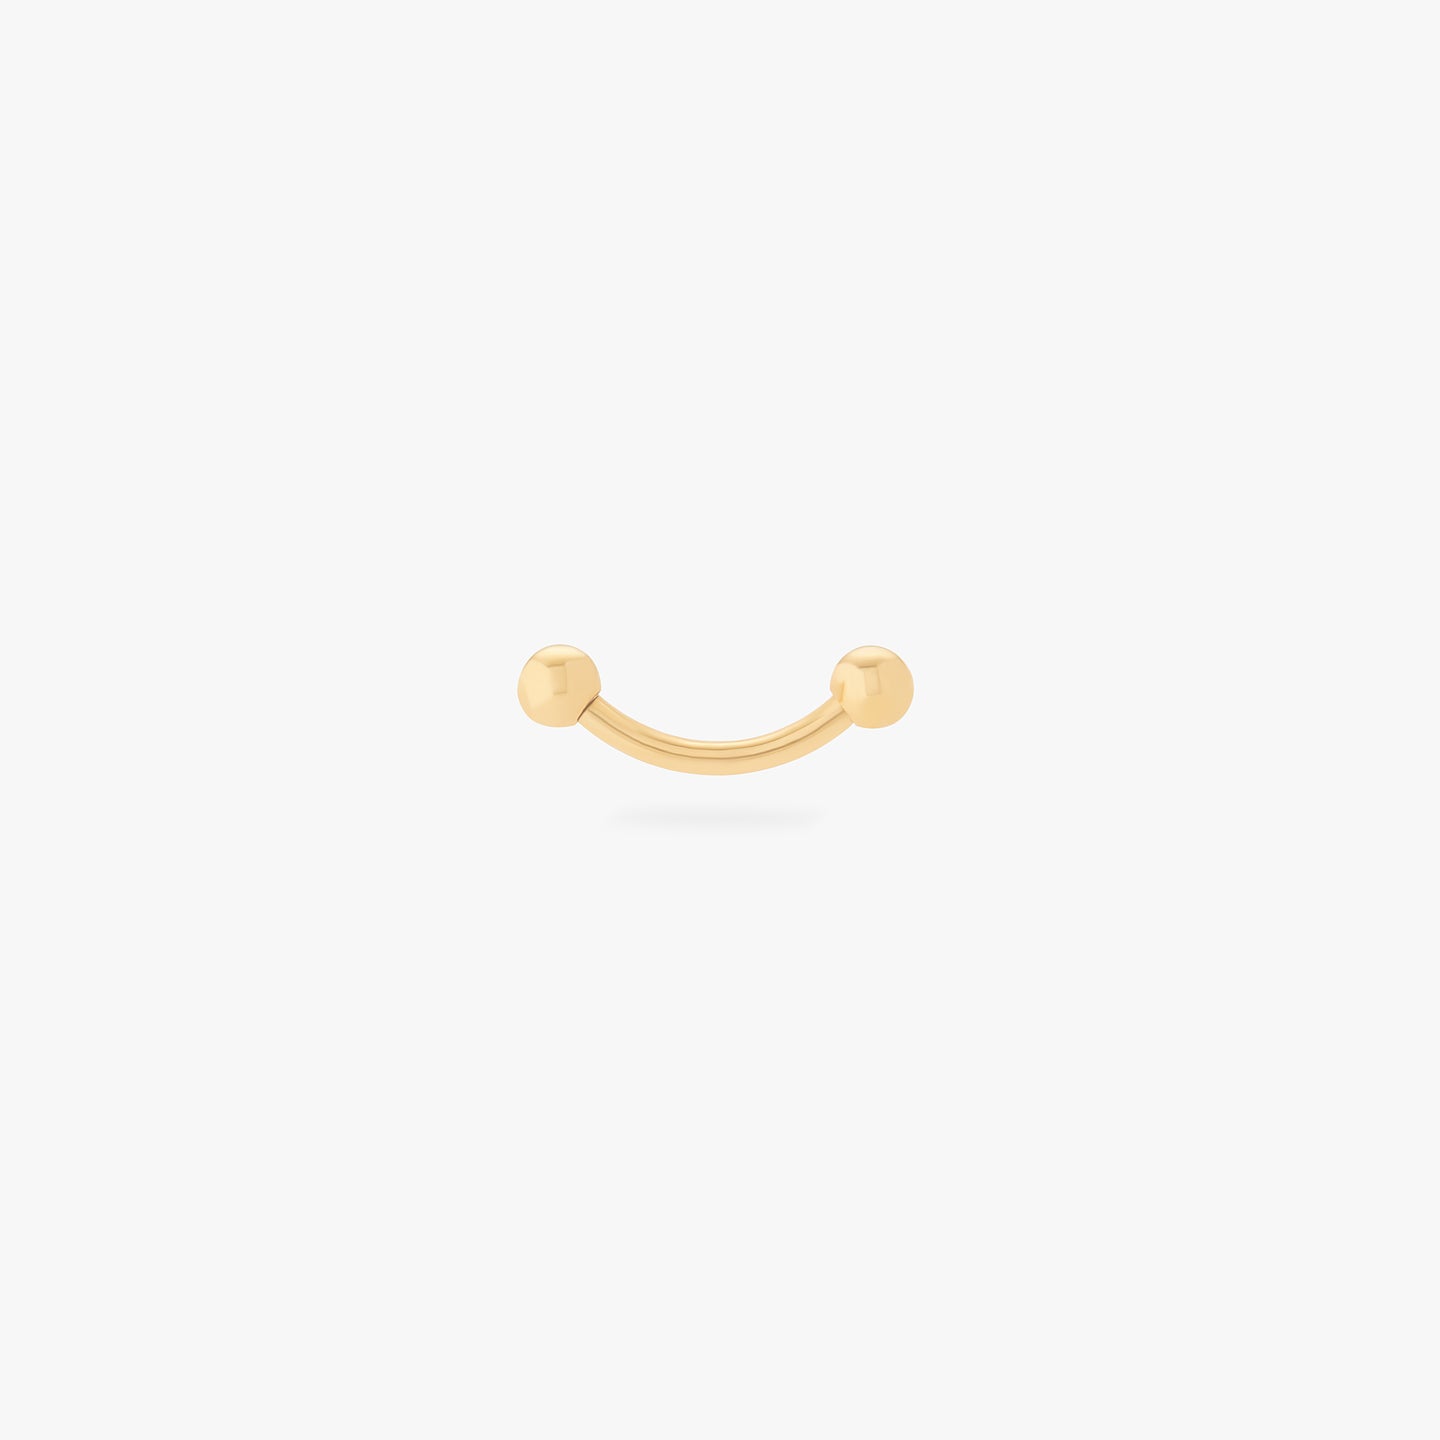 This is an image of an 8mm length gold curved barbell. color:null|gold